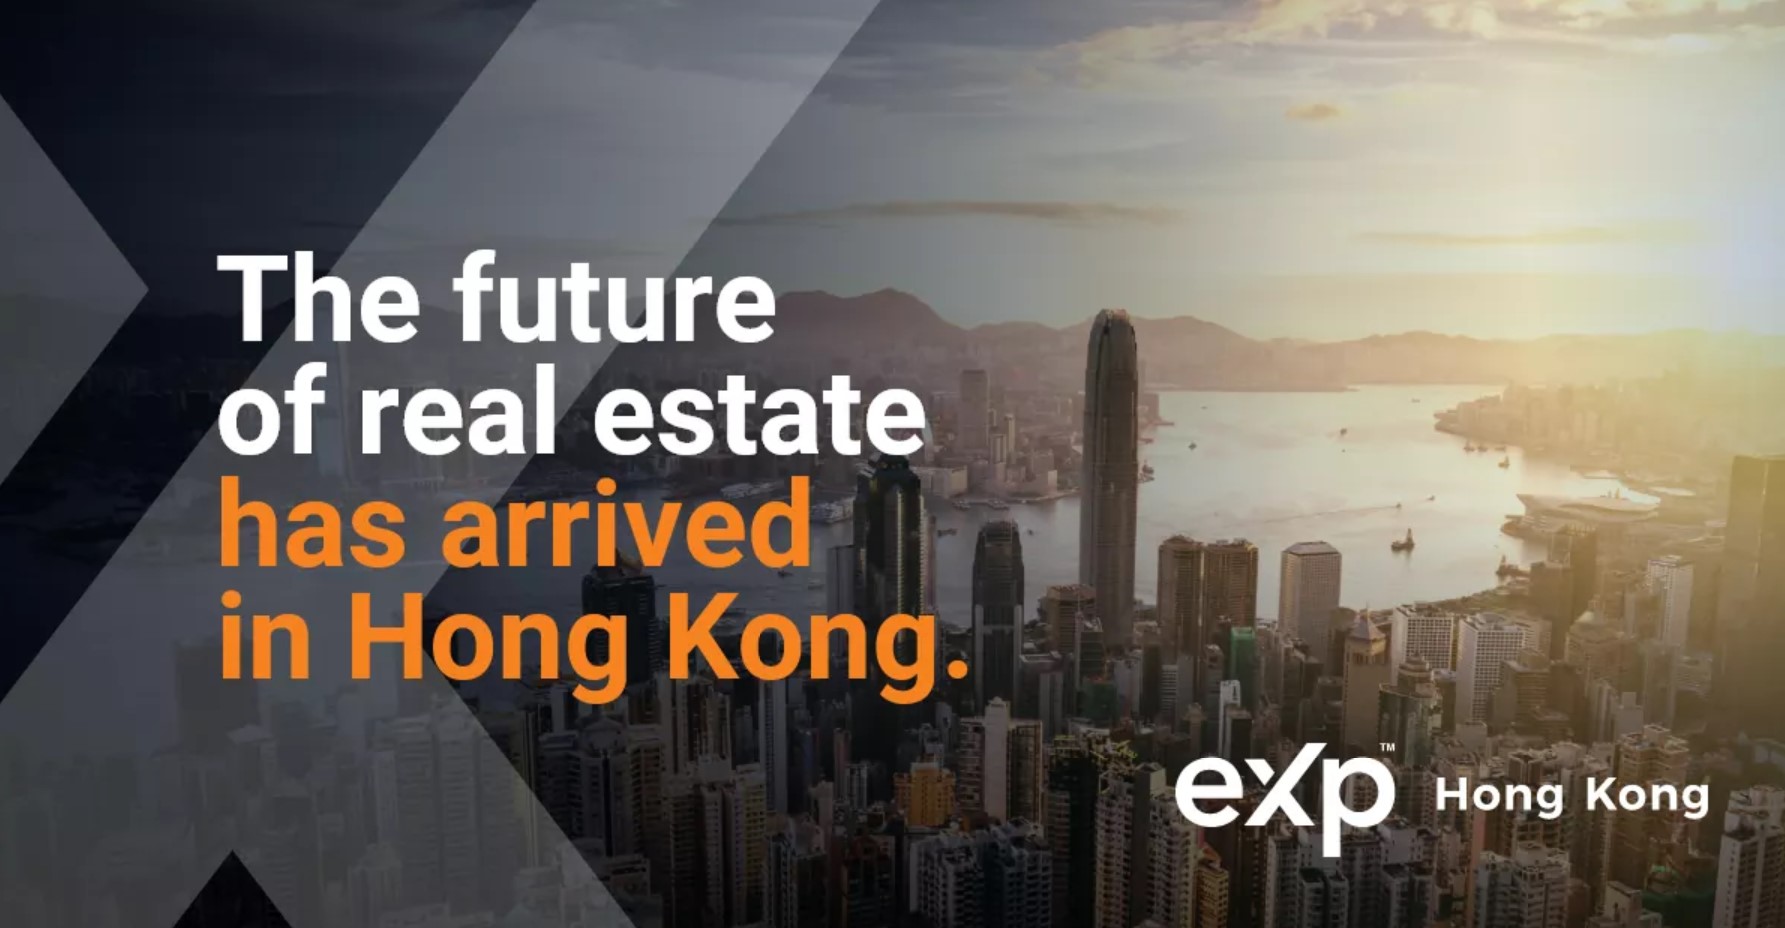 Exp World Holdings Expands Real Estate Operations Into Hong